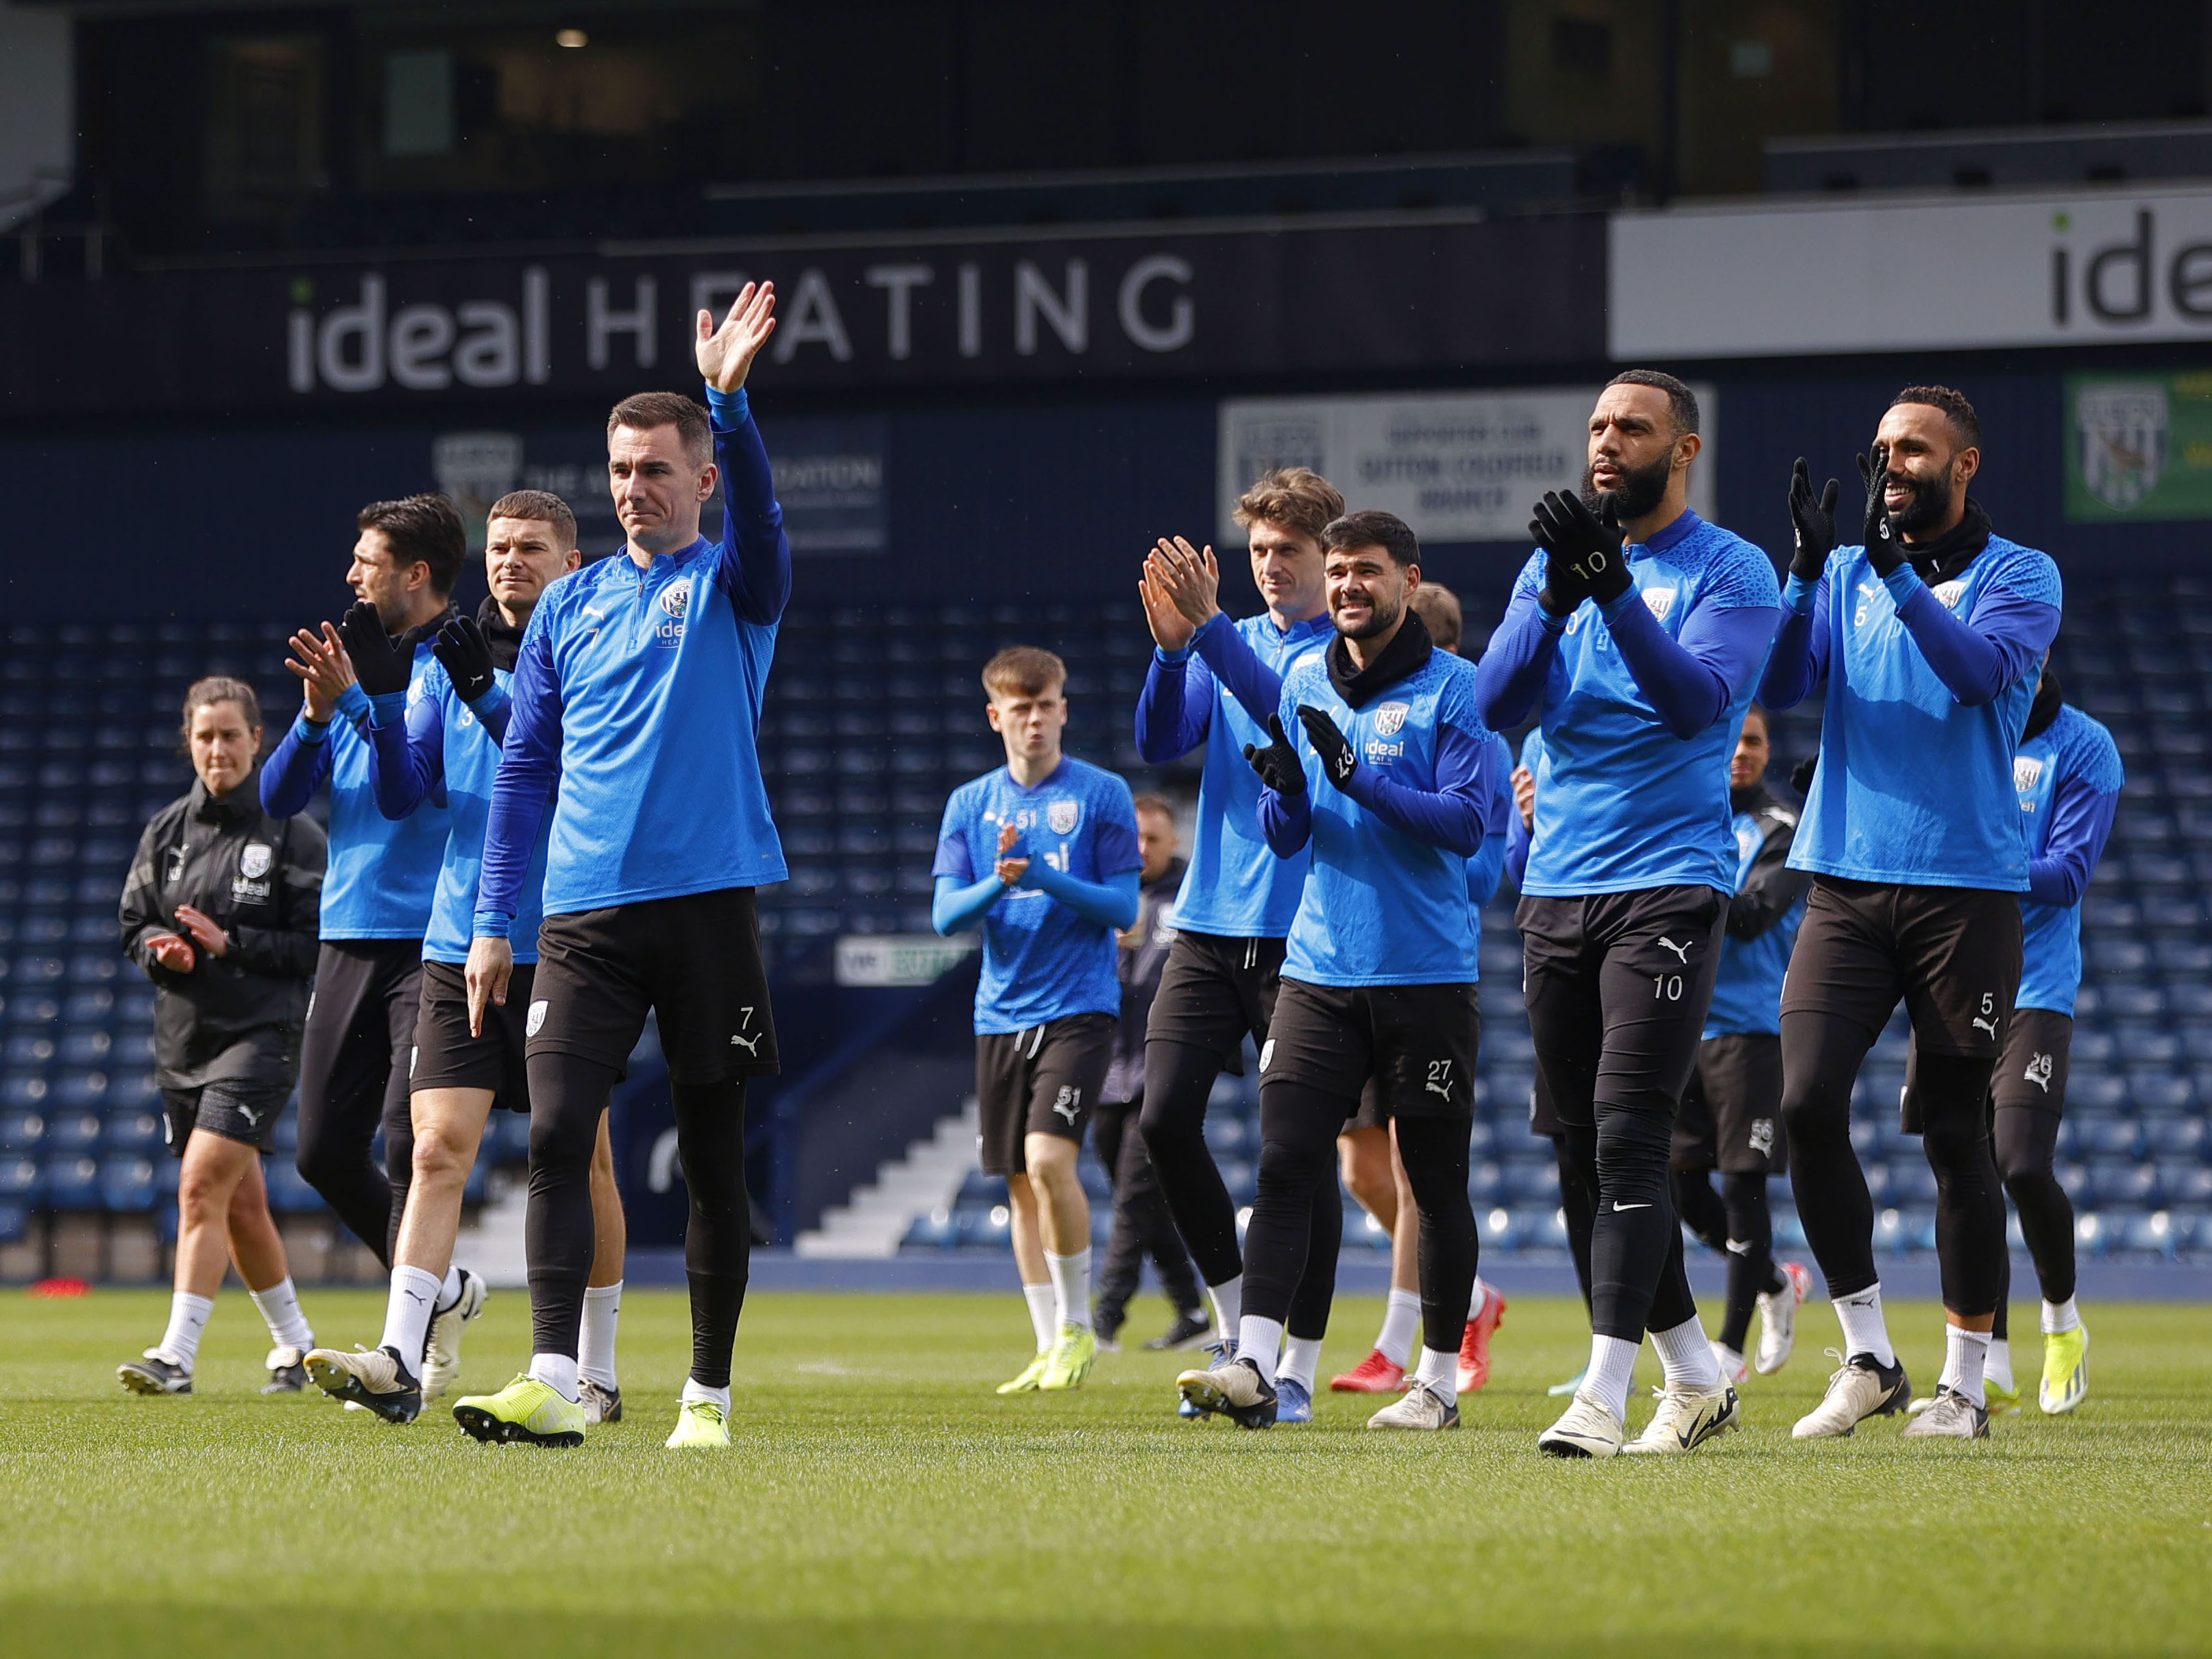 Albion players wave at and applaud supporters at The Hawthorns